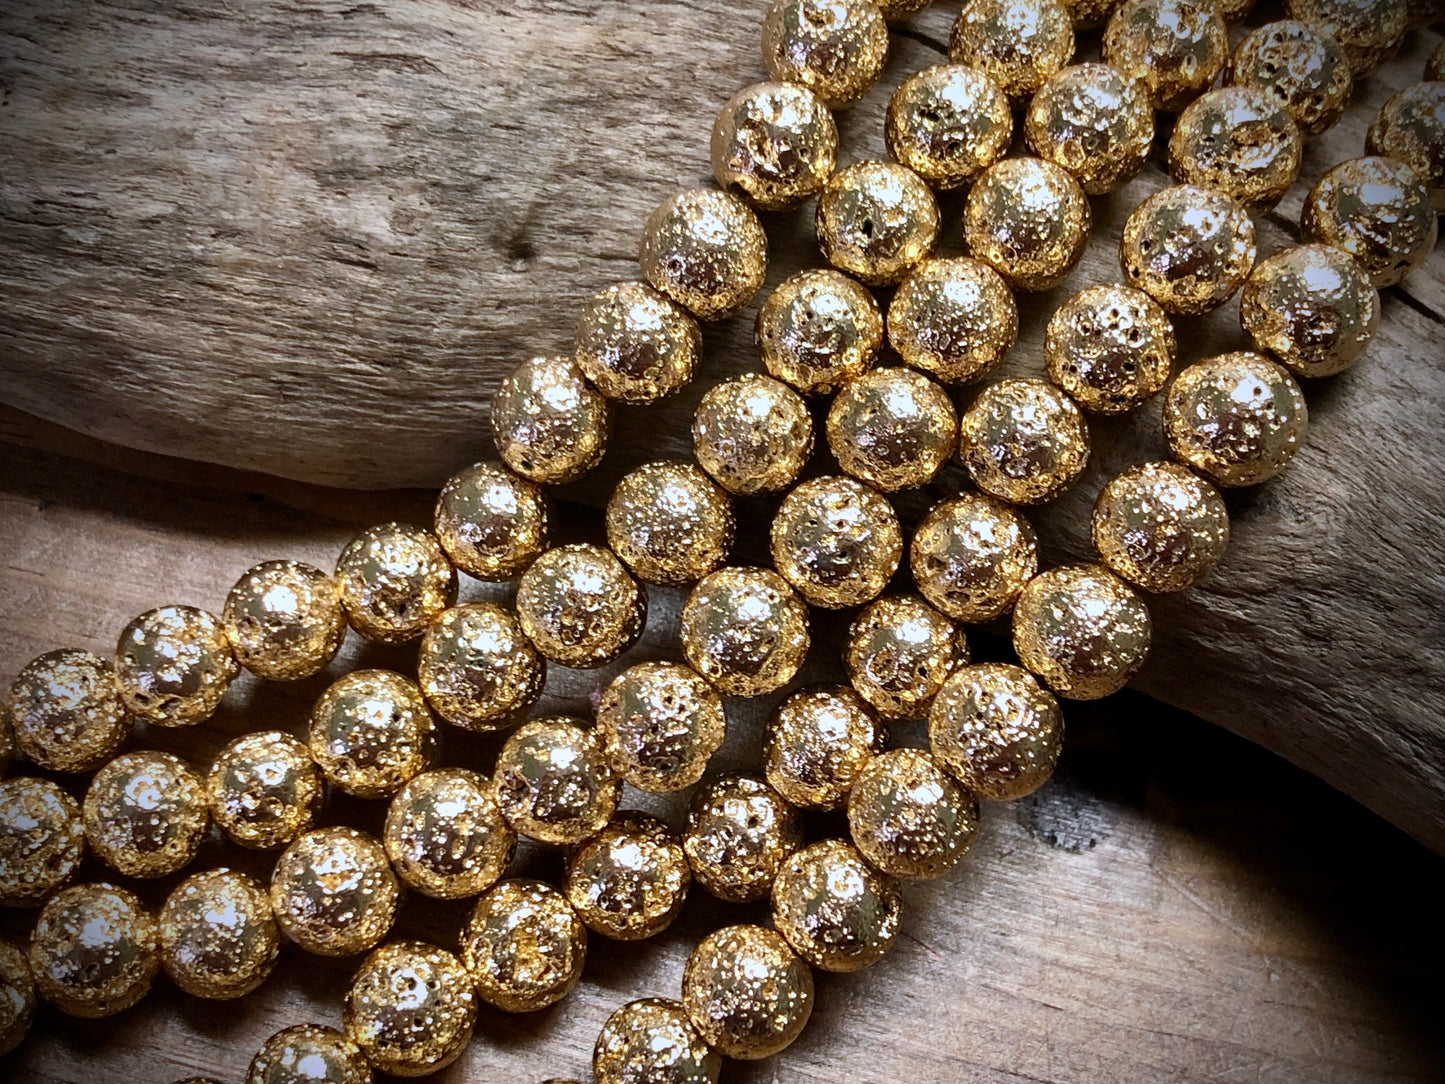 Electro-Coated Lava Bead Strand - Pale Gold - 8mm - 8”